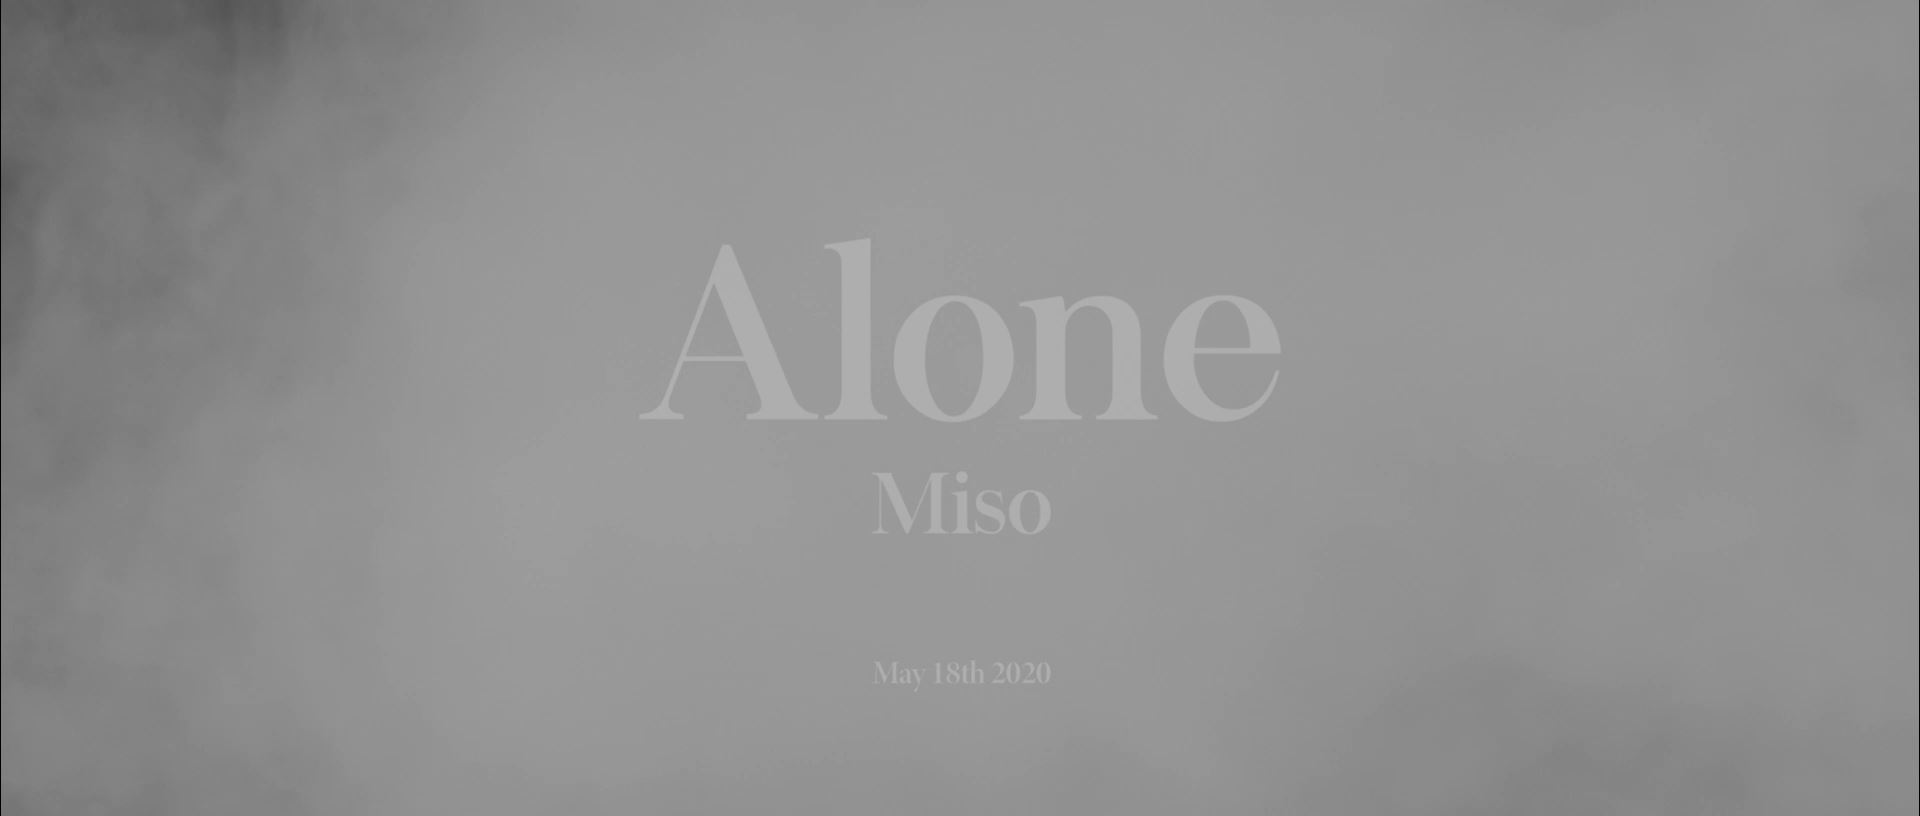 Miso ‘Alone’ (Official Teaser)